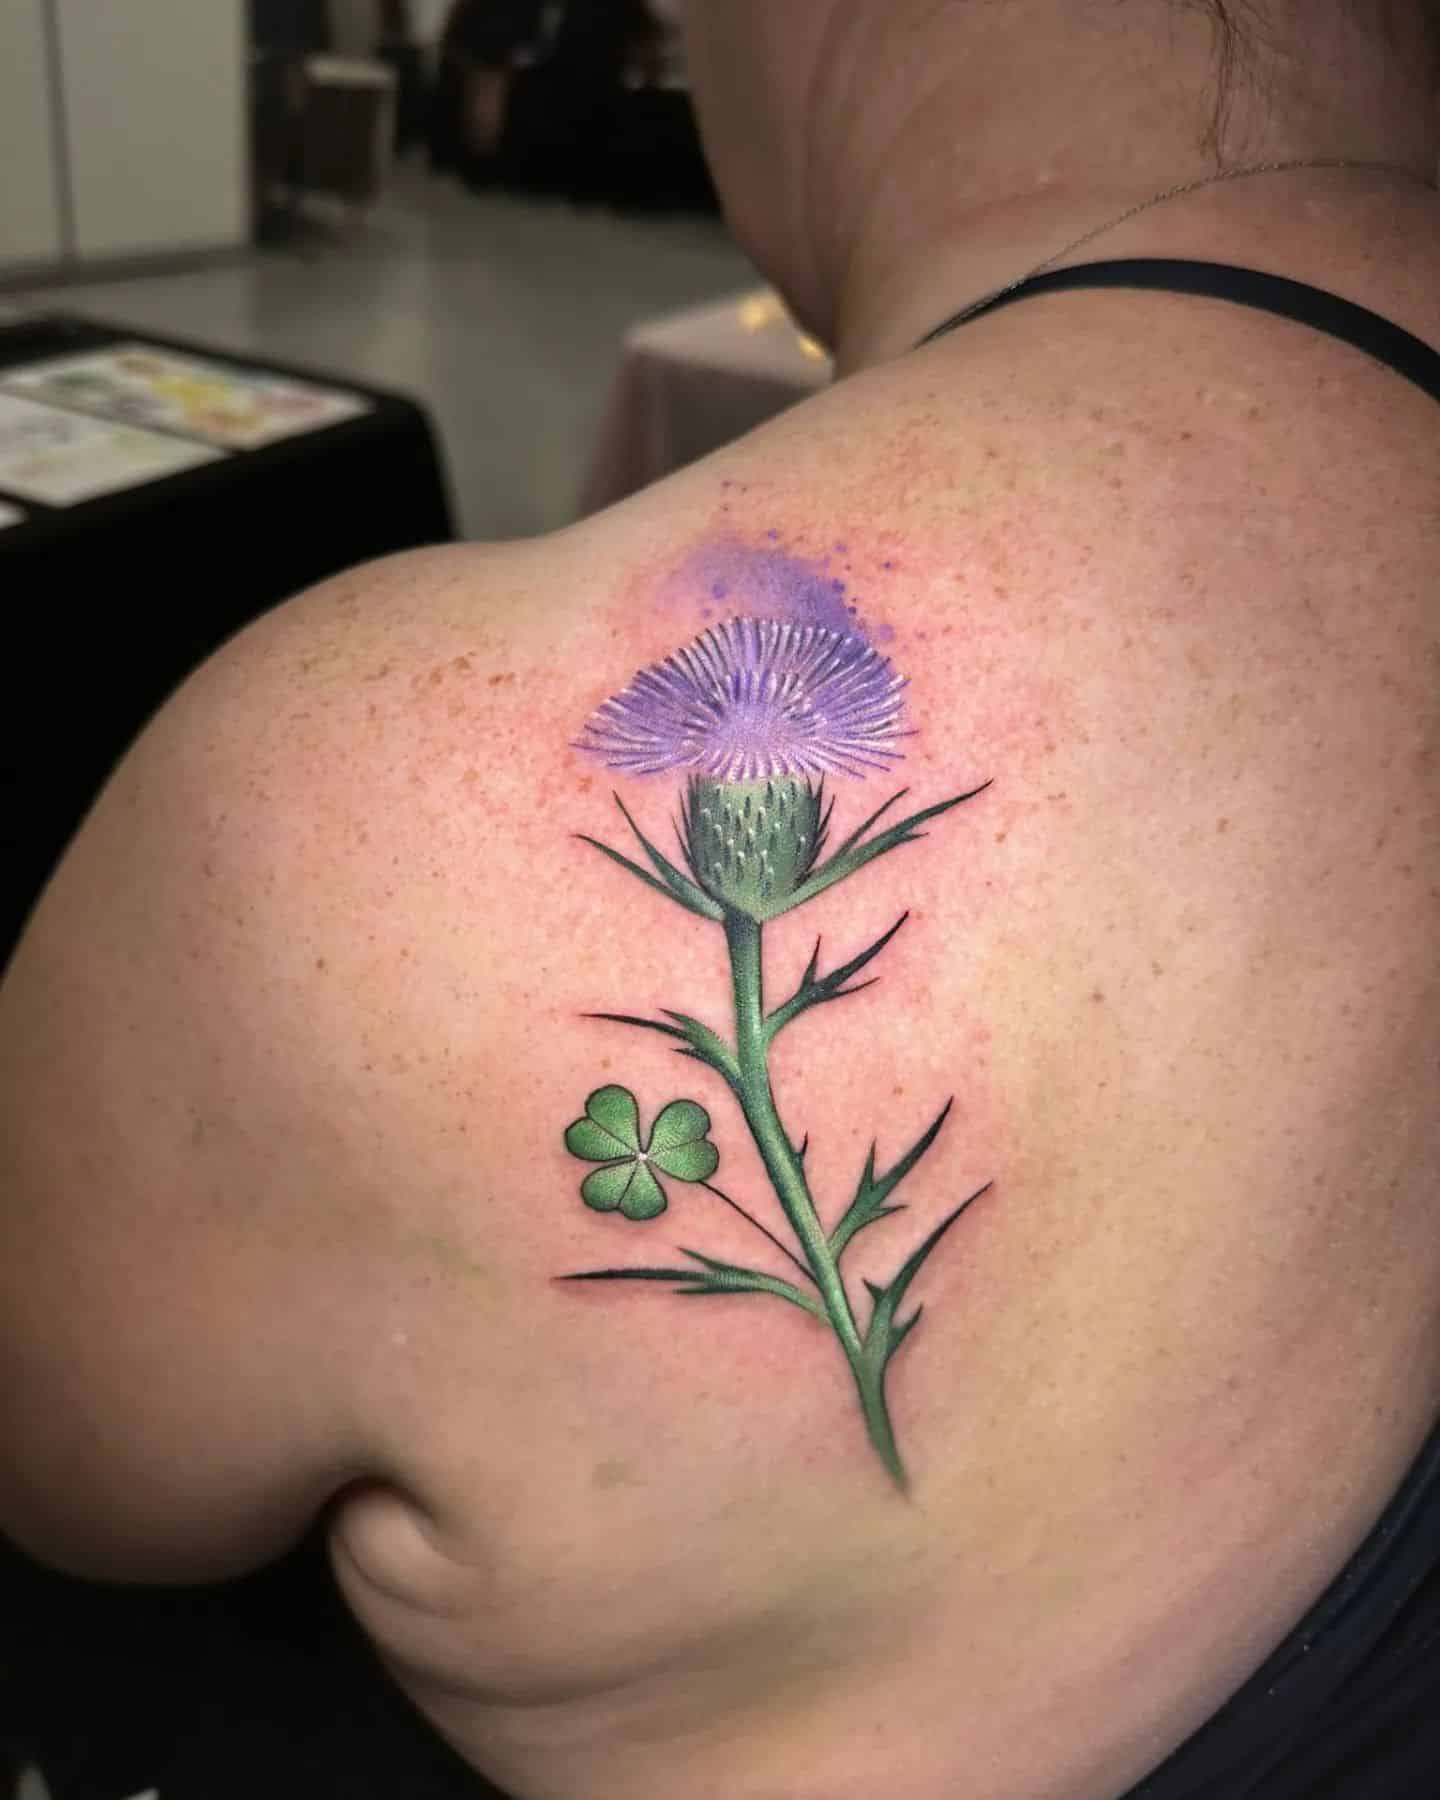 A thistle and shamrock for Alison done by Noemi during the Dublin Tattoo Convention! Was lovely spending time with you and your family Alison and so nice to be able to facilitate a tattoo fusing Scotland and Ireland whilst we were there ❤️☘️🏴󠁧󠁢󠁳󠁣󠁴󠁿

dublintattooconvention 
noemi_tattoo 
                     